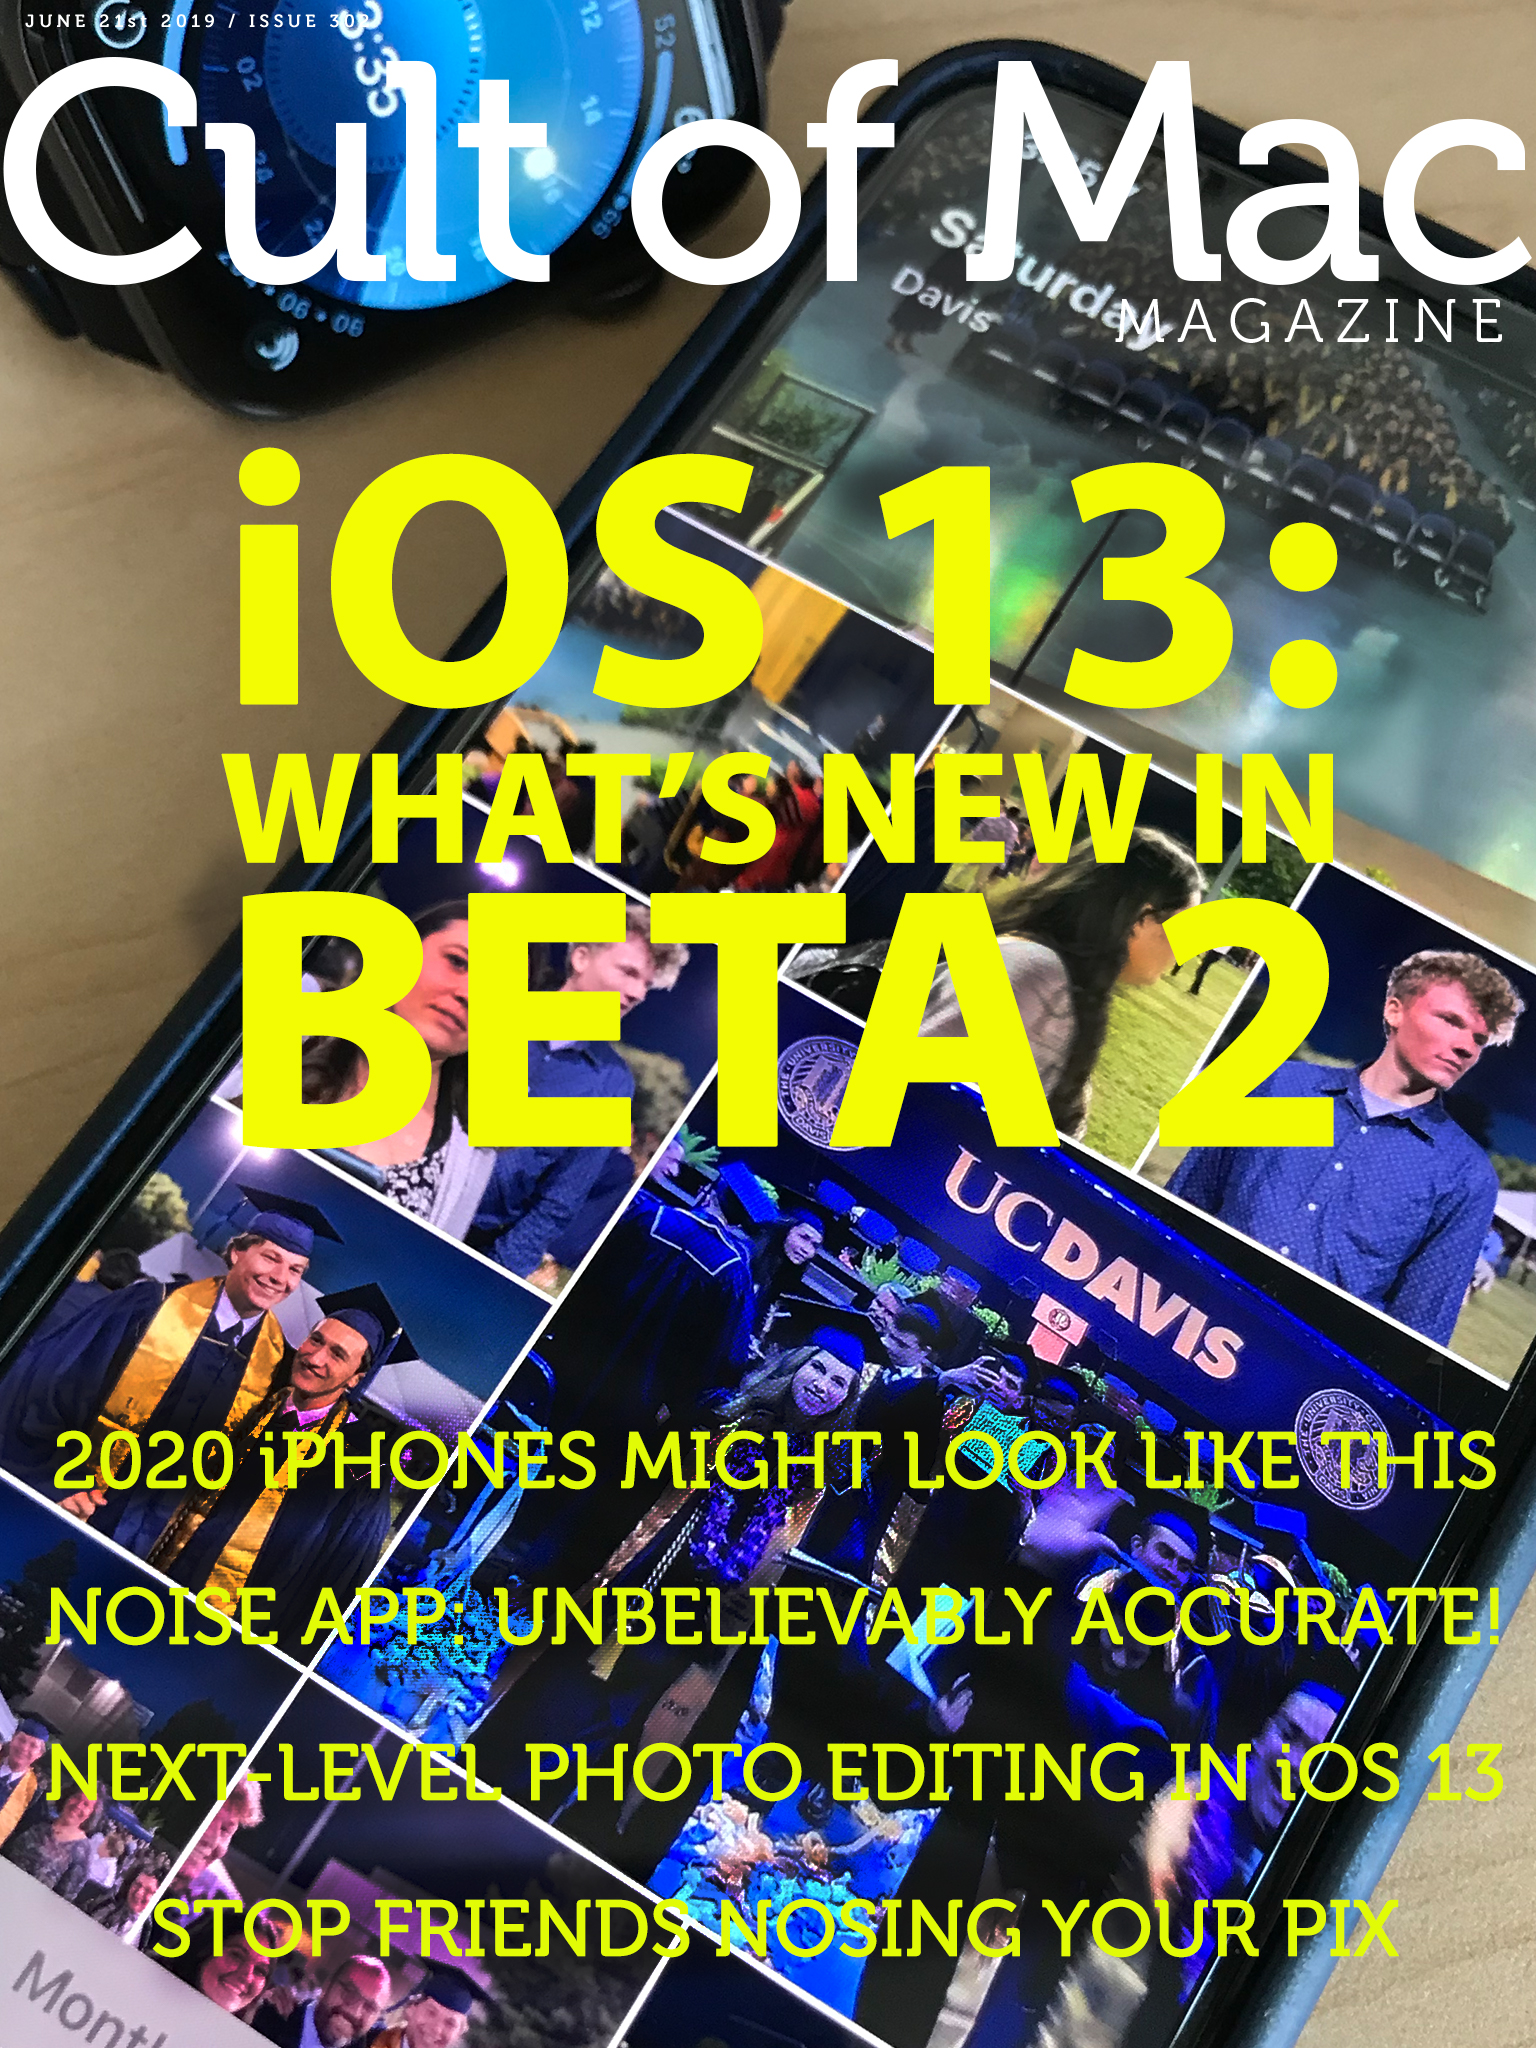 What's new in iOS 13 beta 2? Find out in Cult of Mac Magazine.